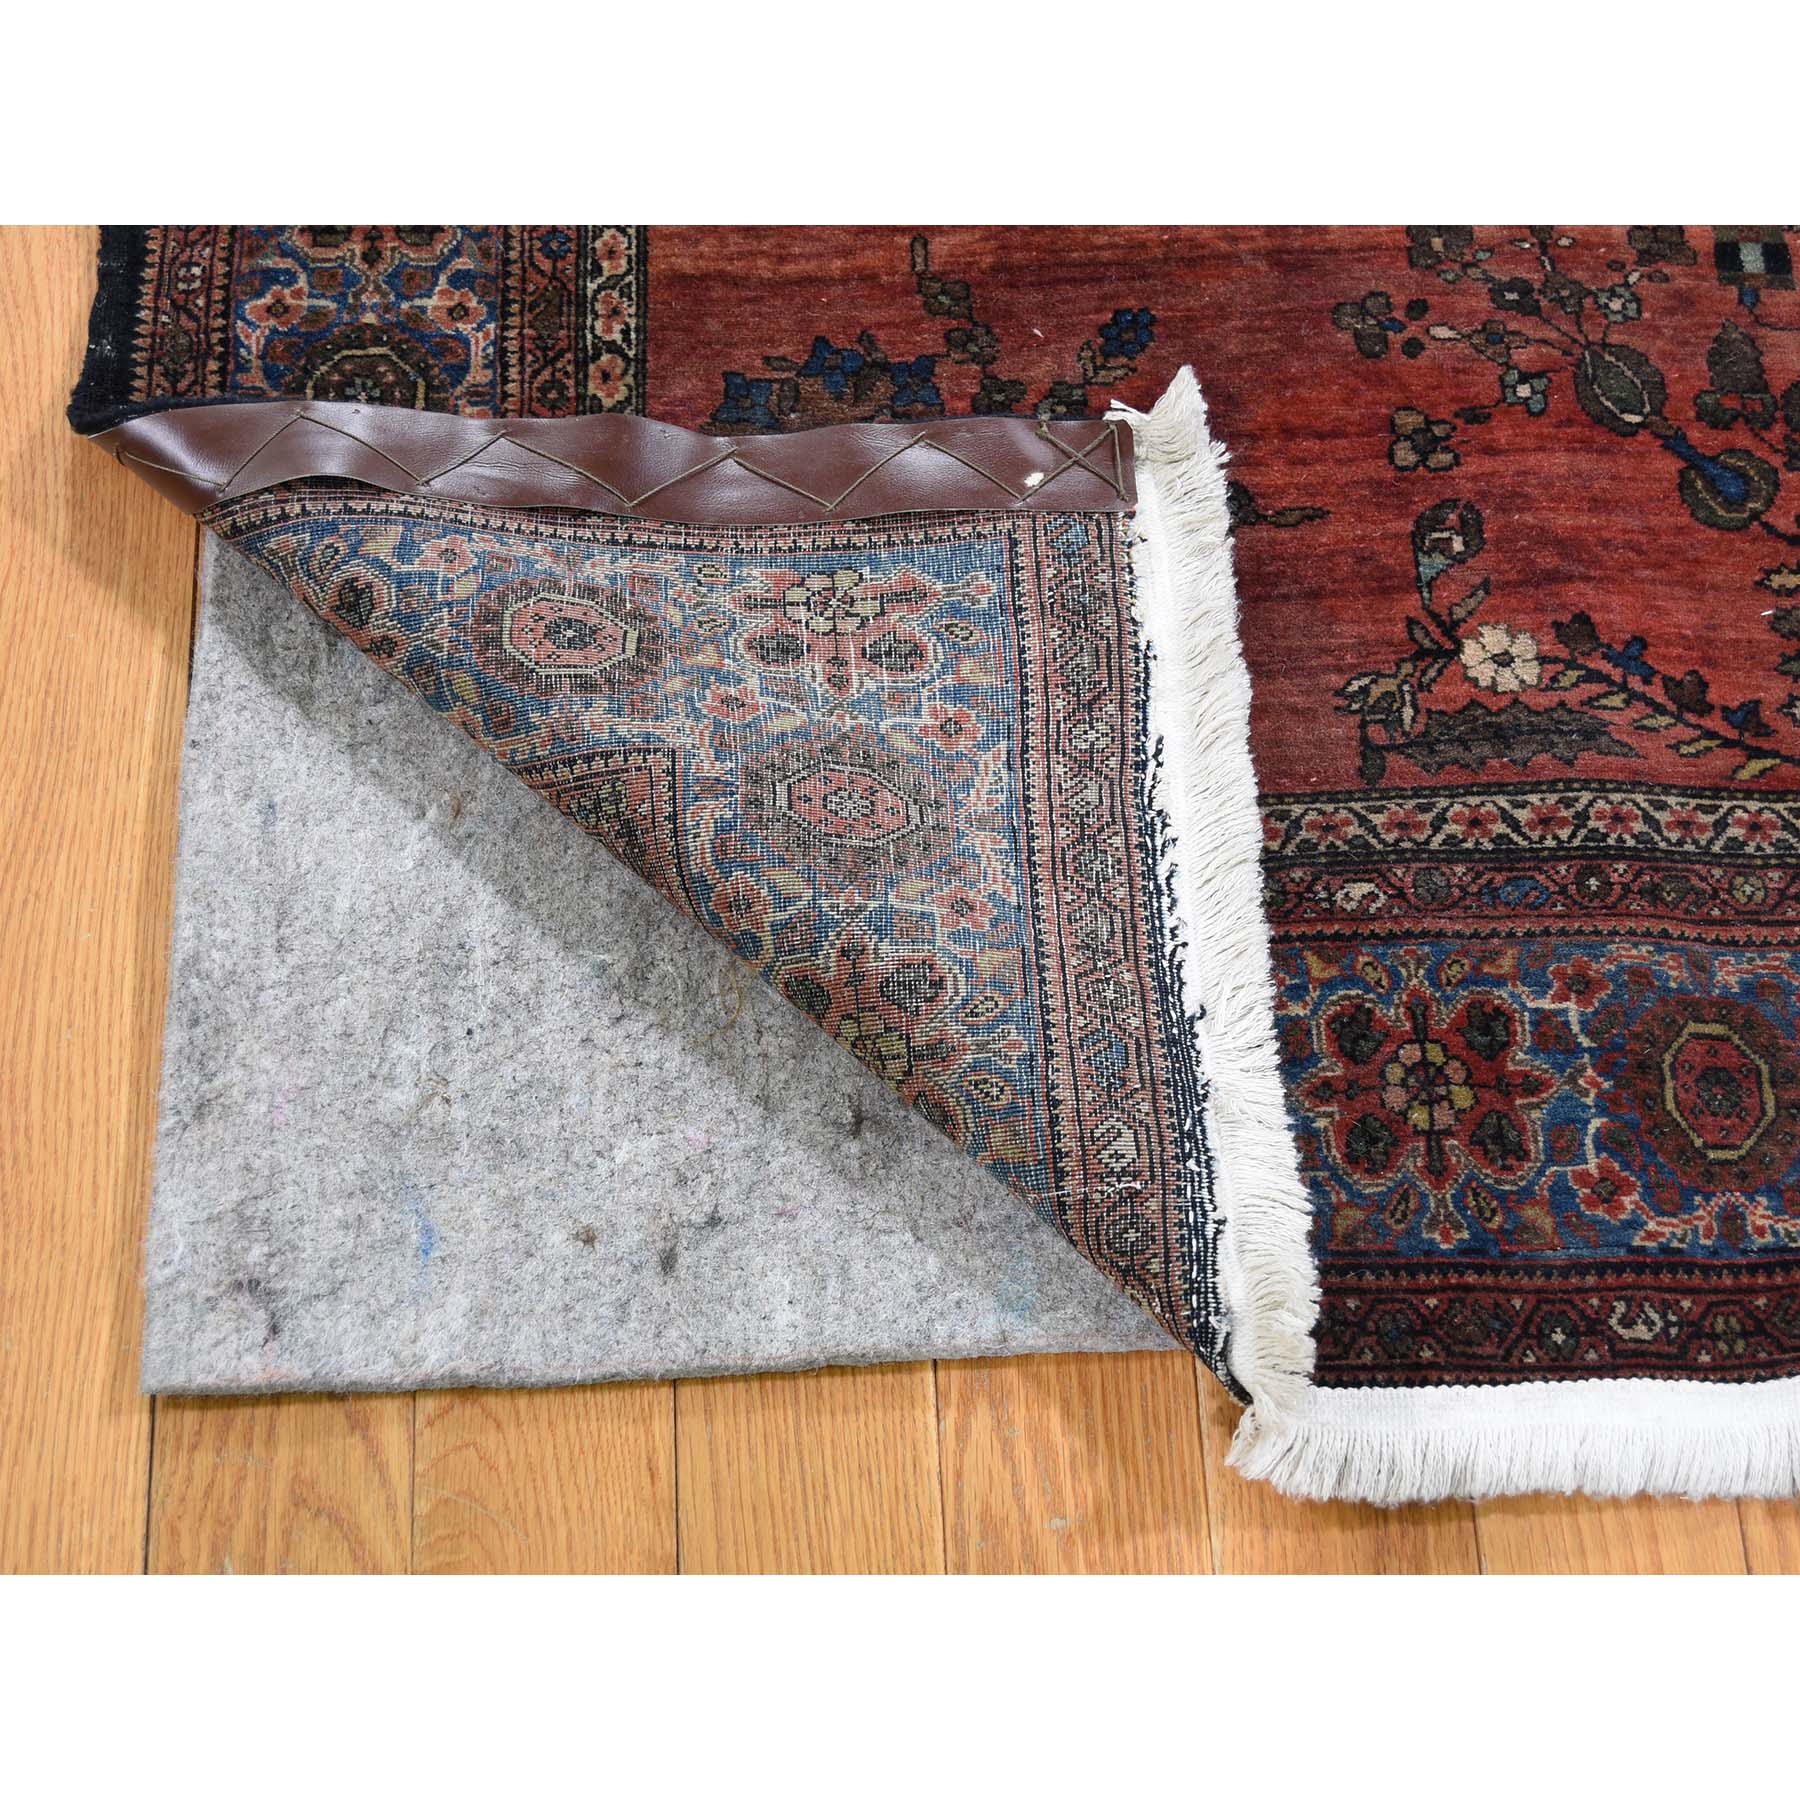 4-2 x6-4  Antique Persian Sarouk Fereghan Worn But Soft Hand-Knotted Oriental Rug 